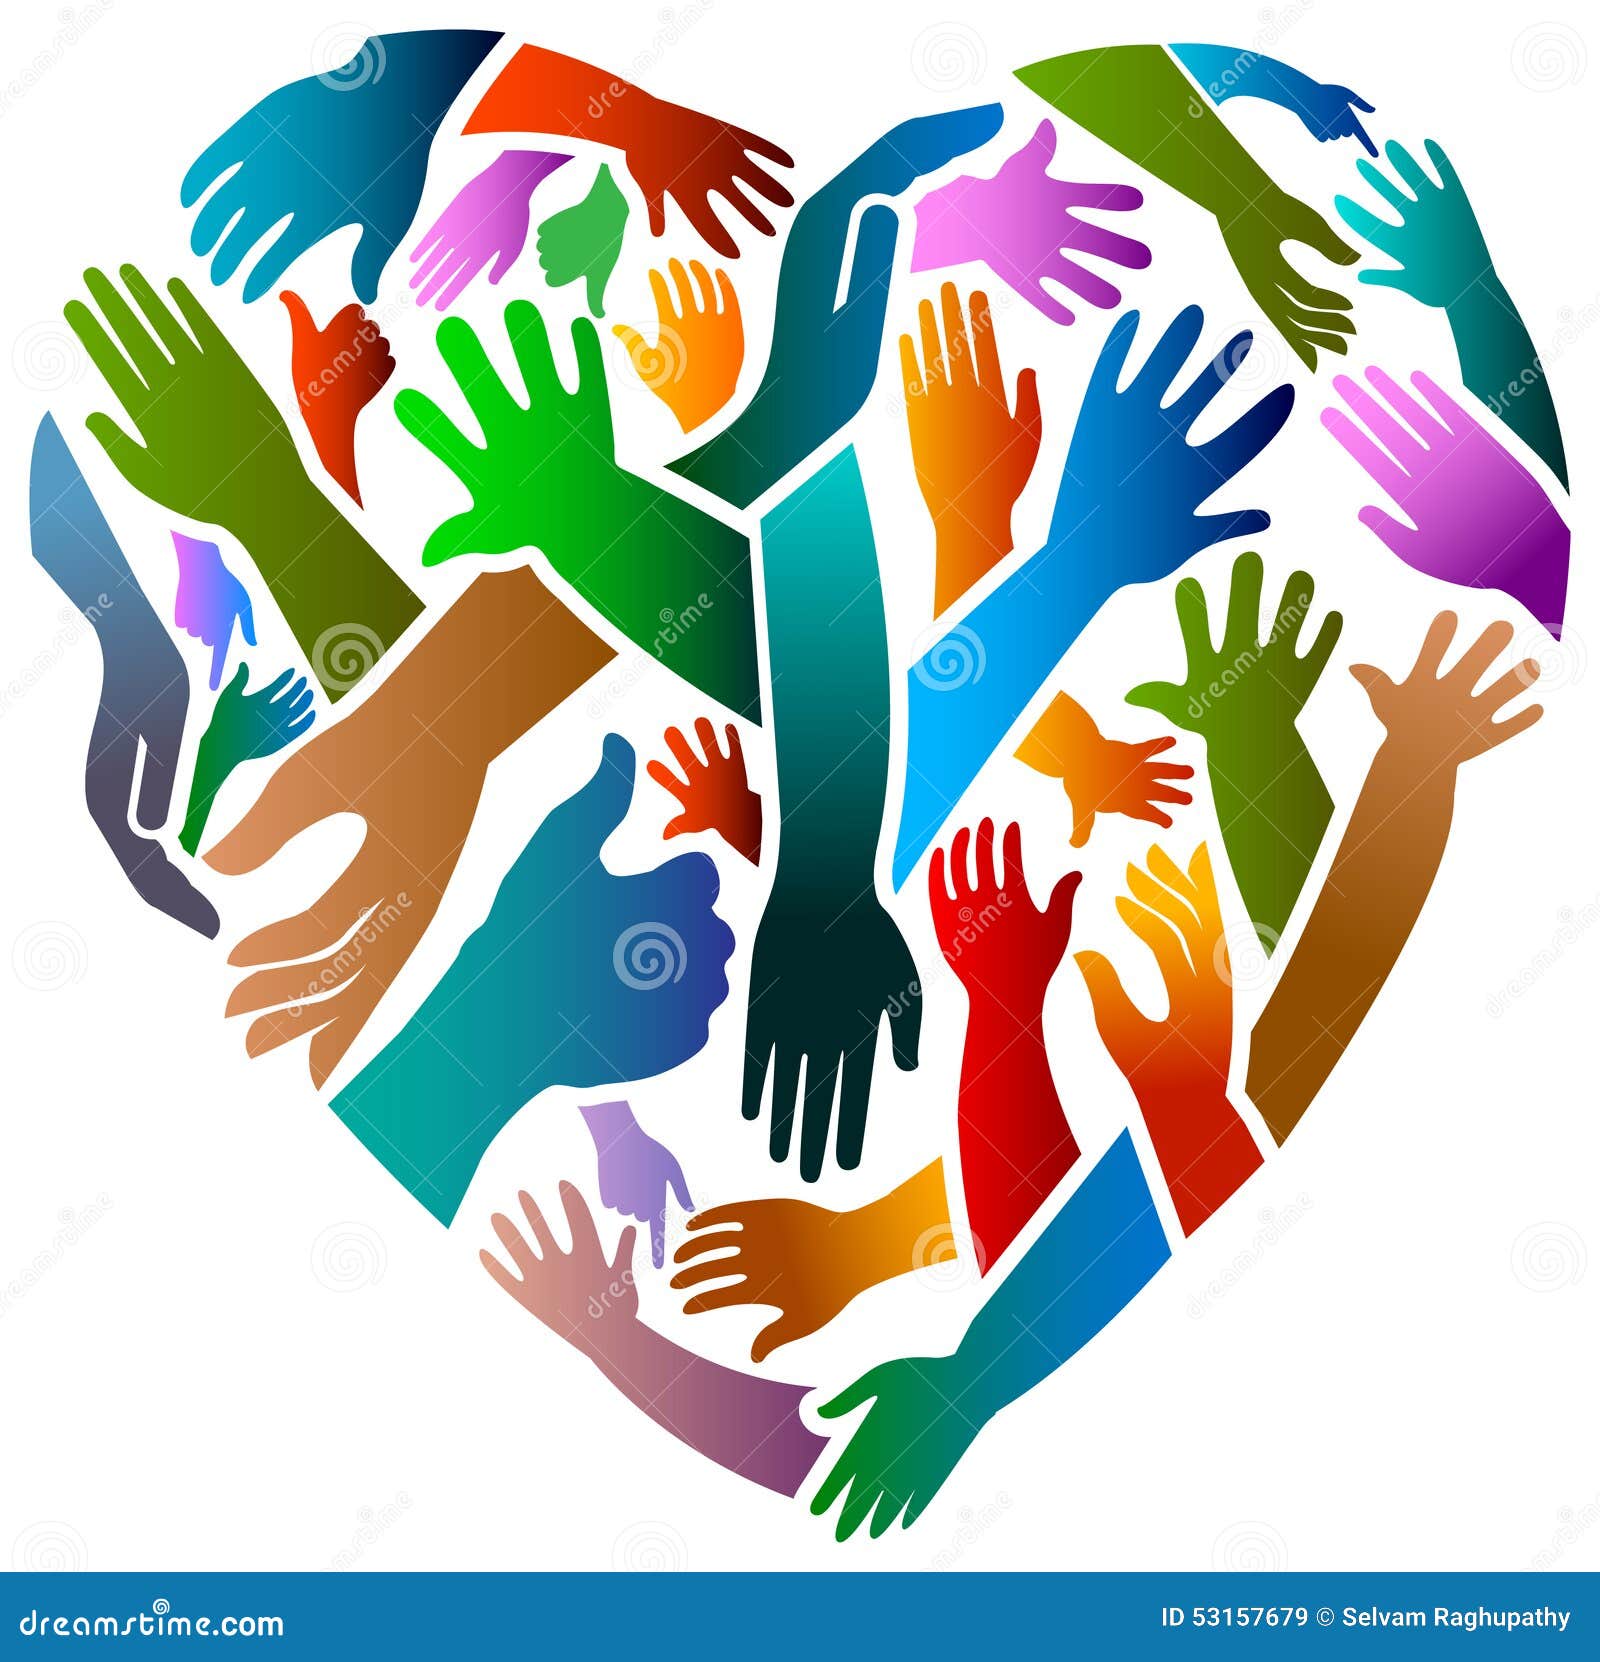 free clipart images helping hands - photo #44